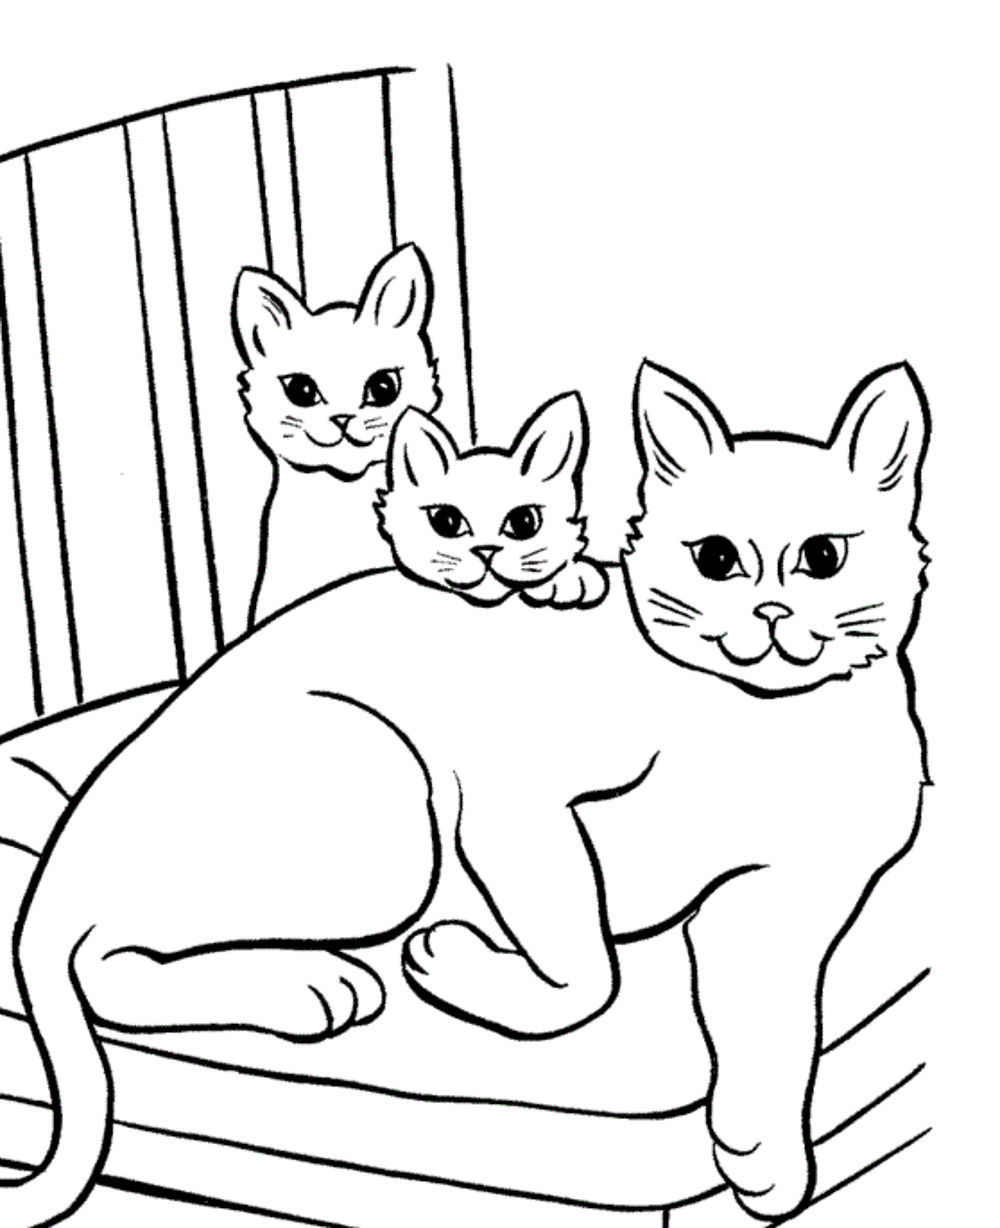 cat printable coloring pages bestappsforkidscom